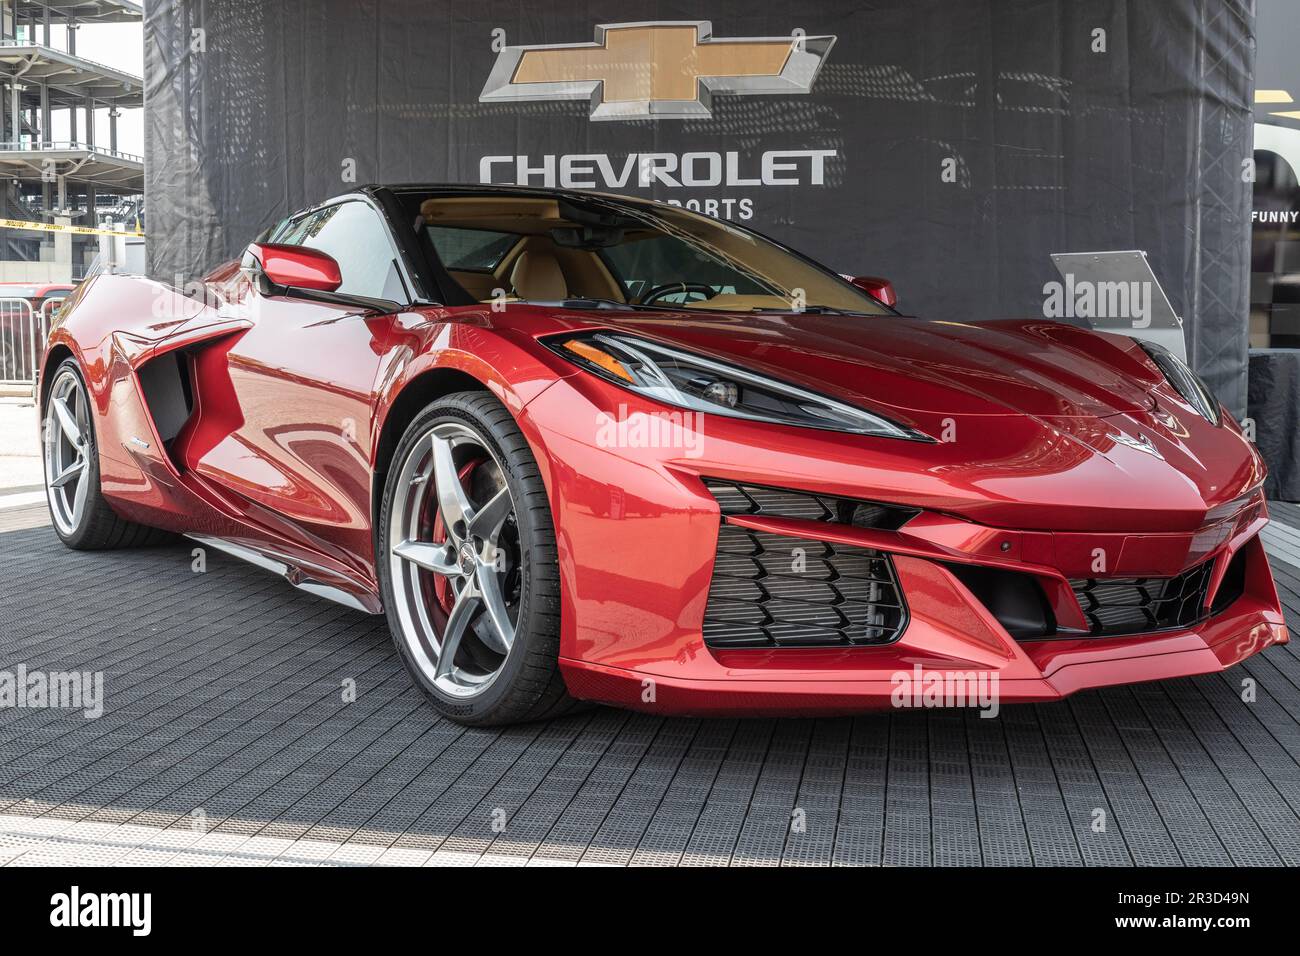 Indianapolis - Circa May 2023: Chevrolet Corvette display at IMS. Chevy offers the Corvette in 1LT, 2LT, 3LT, and Z06 models. Stock Photo